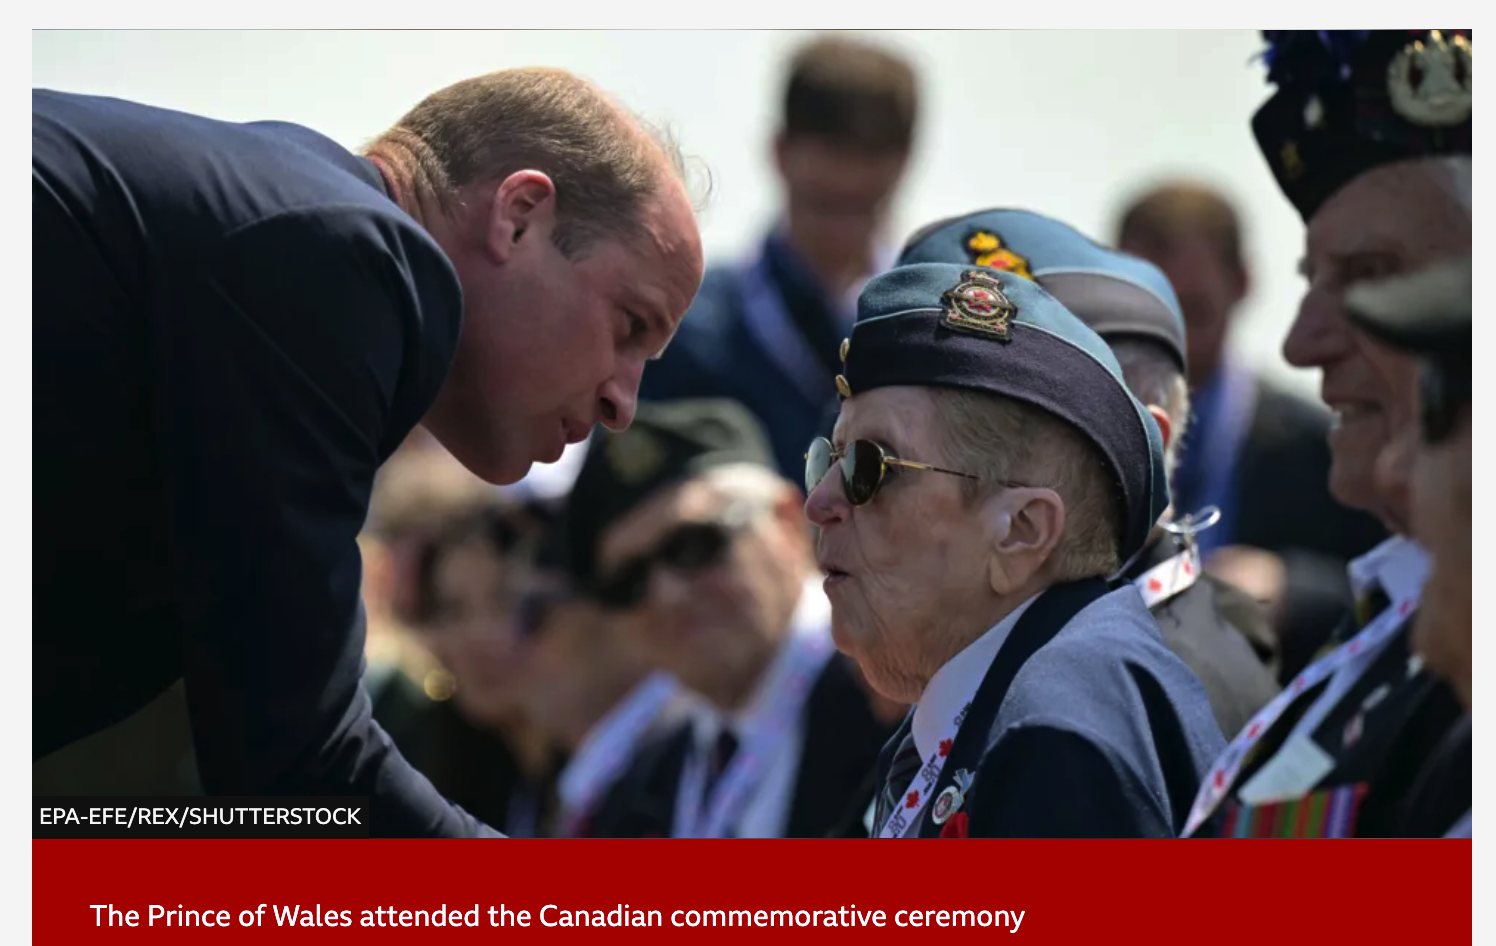 Honouring D-Day: A Reflection on Aging & Health